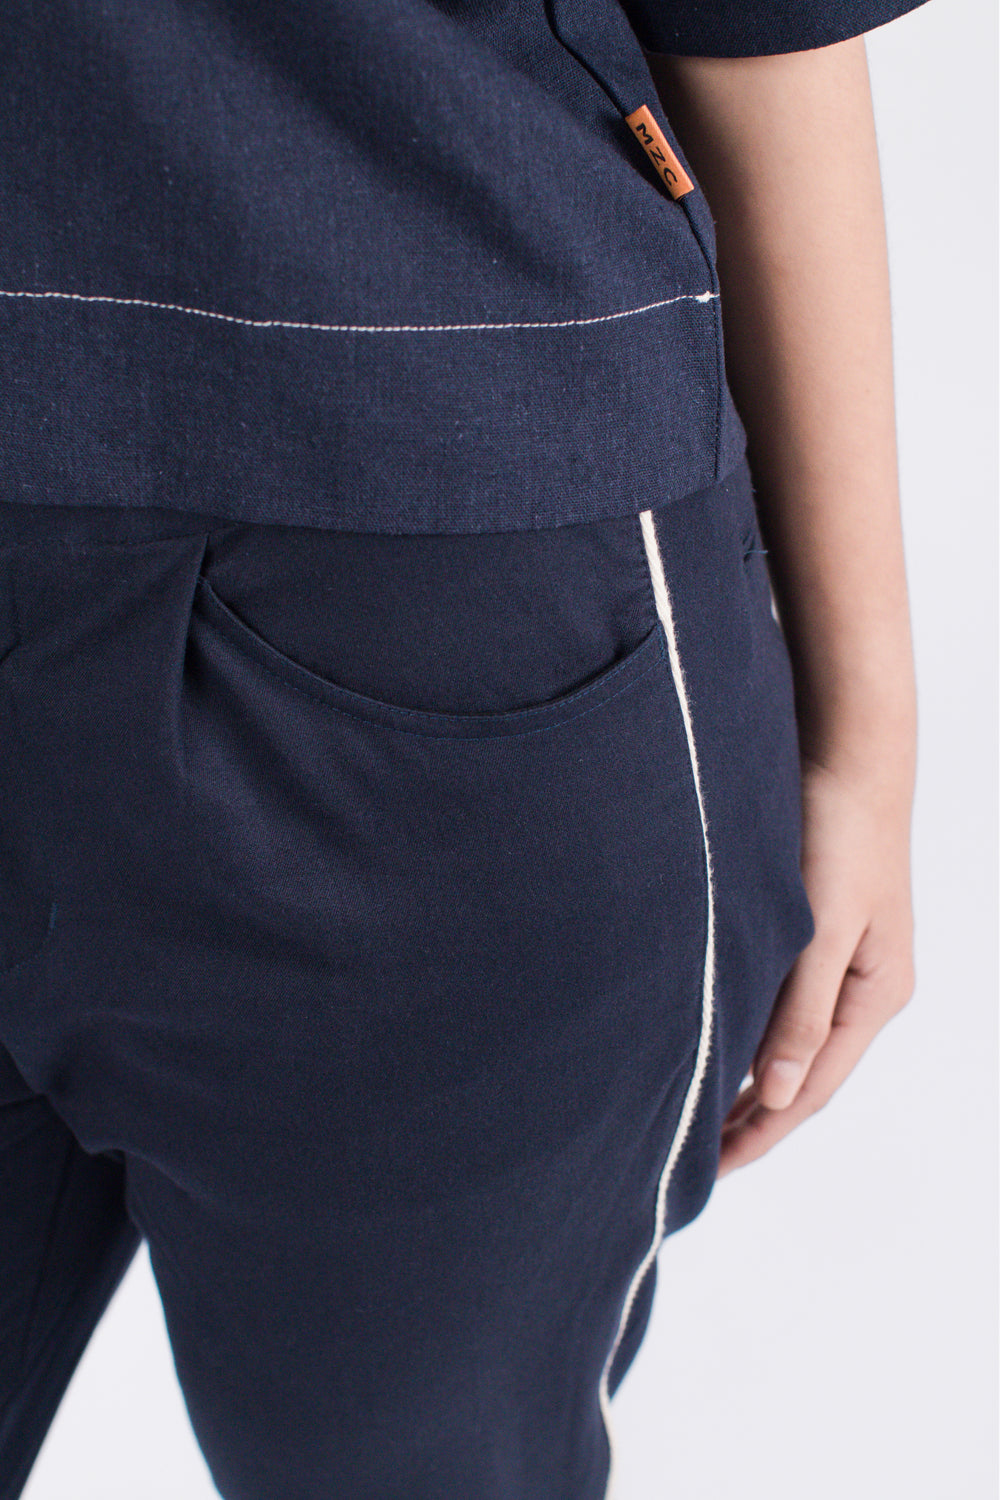 Muzca Esme Ankle Pants Modest Loose Fitting Navy Denim Women Trousers with White Lining and Pockets in 100% Cotton